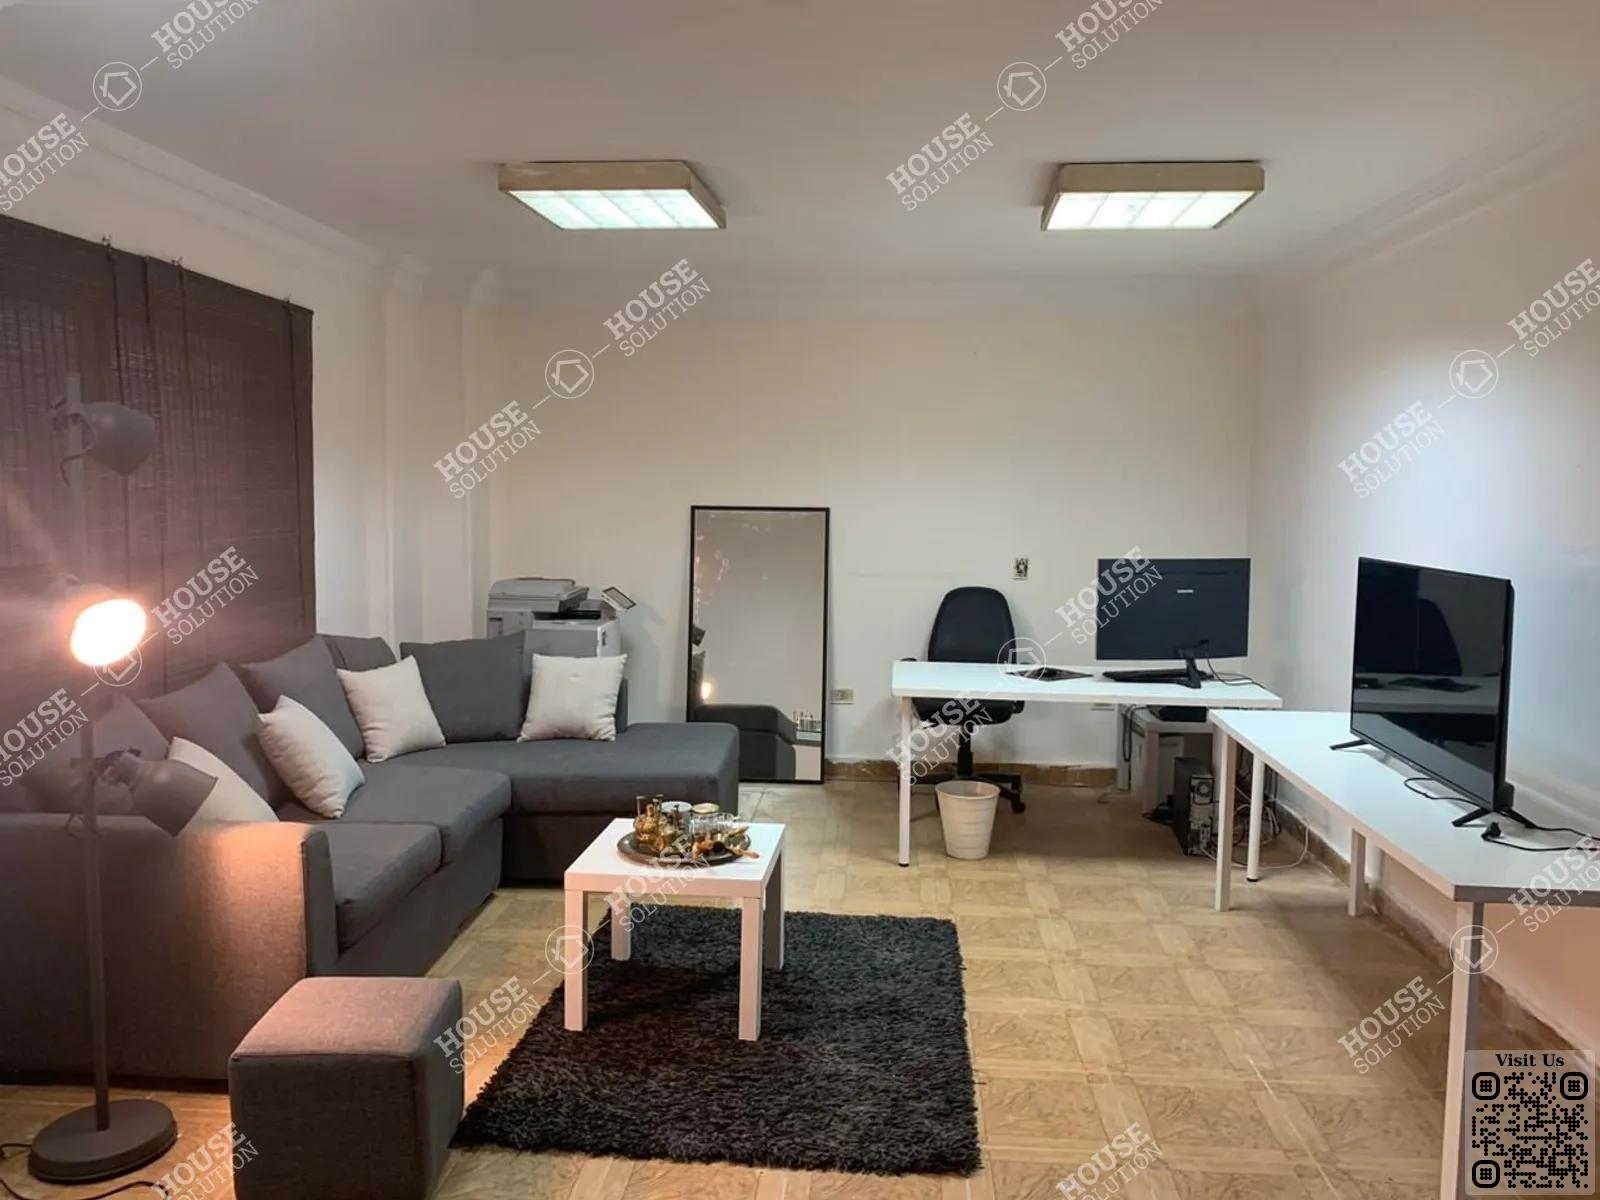 RECEPTION  @ Office spaces For Rent In Maadi New Maadi Area: 110 m² consists of 2 Bedrooms 1 Bathrooms Semi furnished 3 stars #5691-1